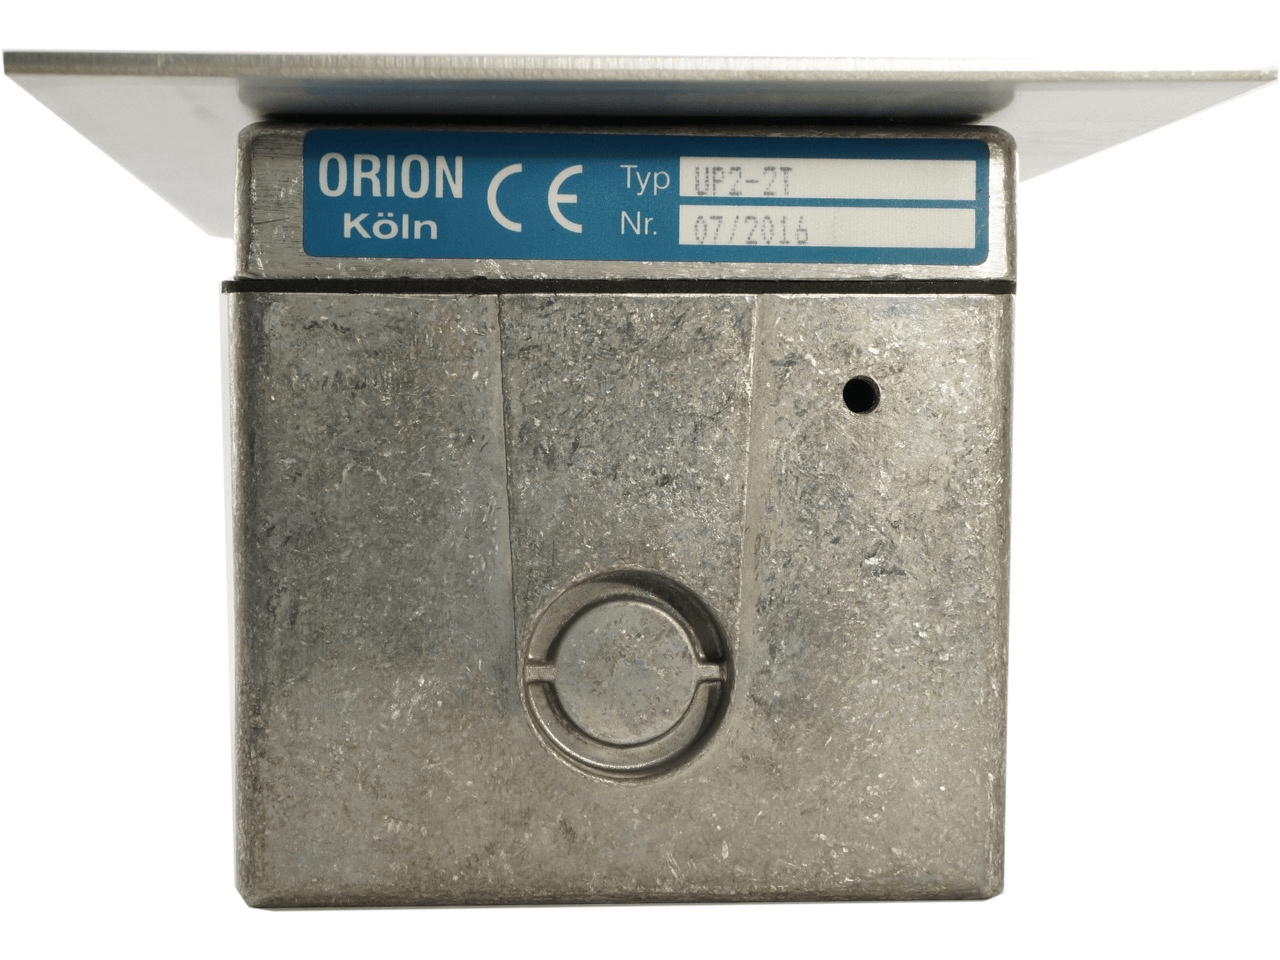 Orion UP 2-2T Key-Switch Flush-Mount 2-Direction with Stop-Button